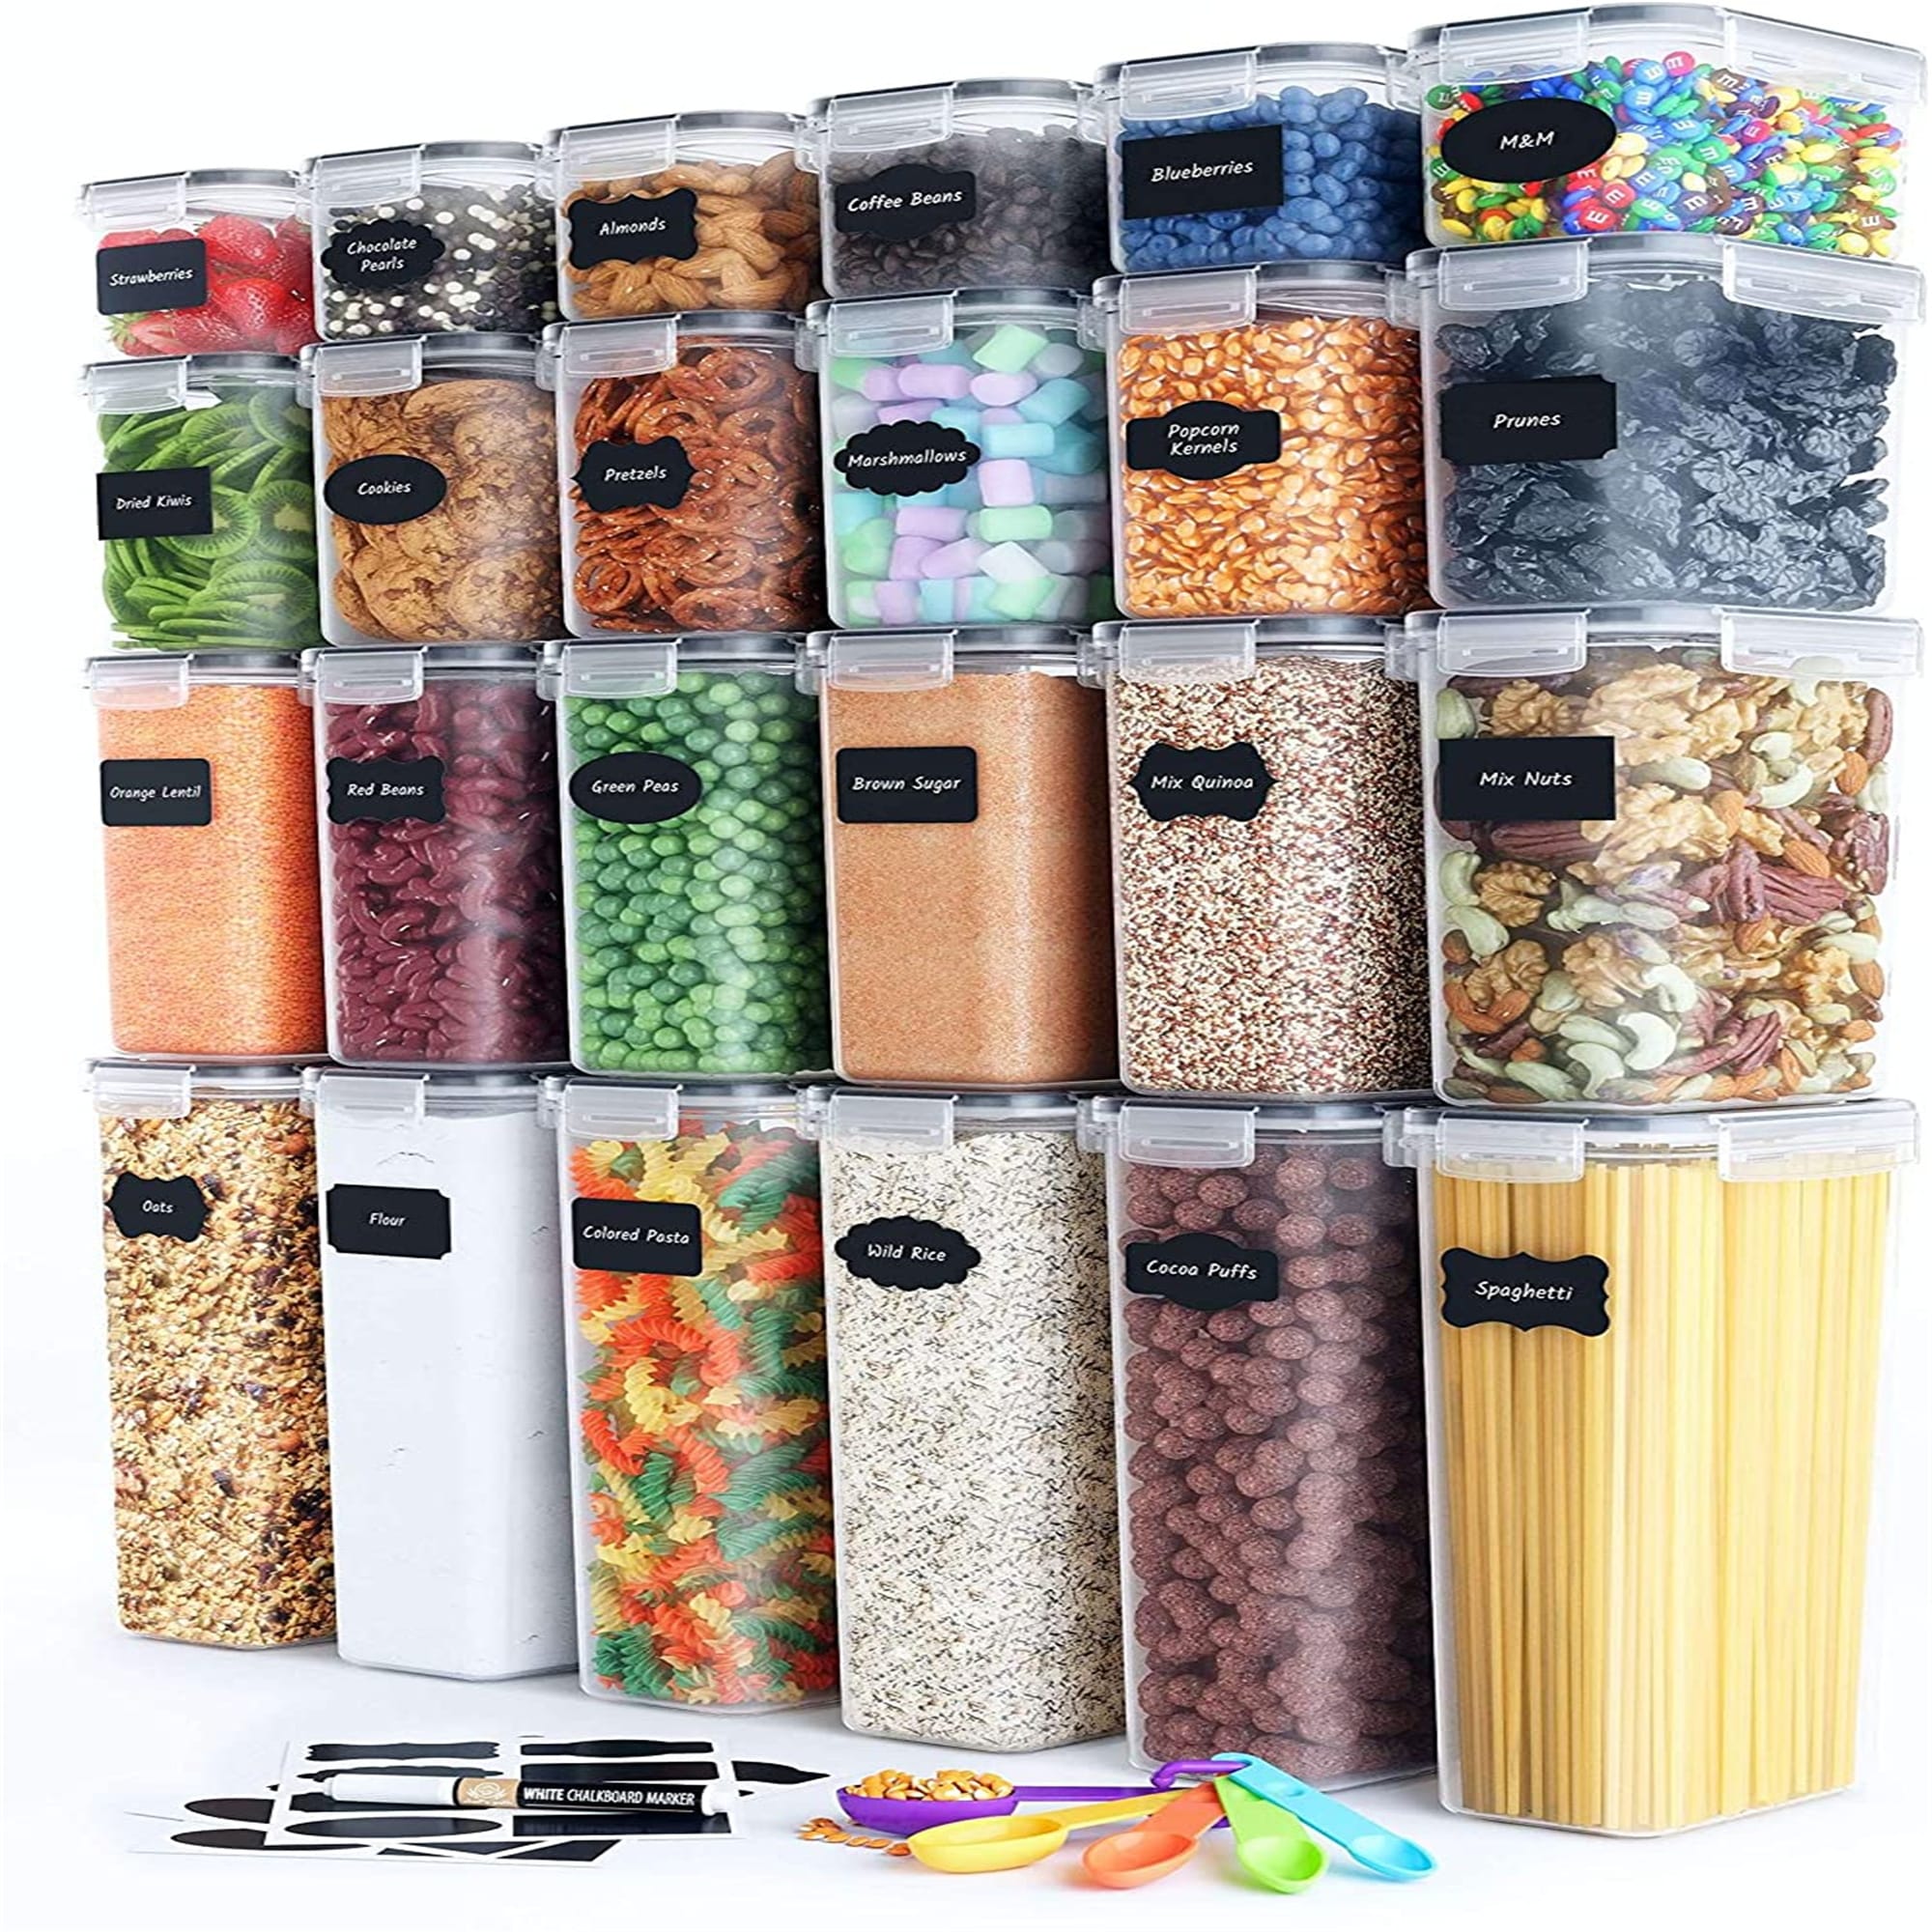 https://ak1.ostkcdn.com/images/products/is/images/direct/b670a59eb4248f6818ca77fc0848075f2df3a7cc/Airtight-Food-Storage-Container-Set-14-PC-Kitchen-%26-Pantry-Organization-BPA-Free-Plastic-Canisters-with-Durable-Lids-Ideal.jpg